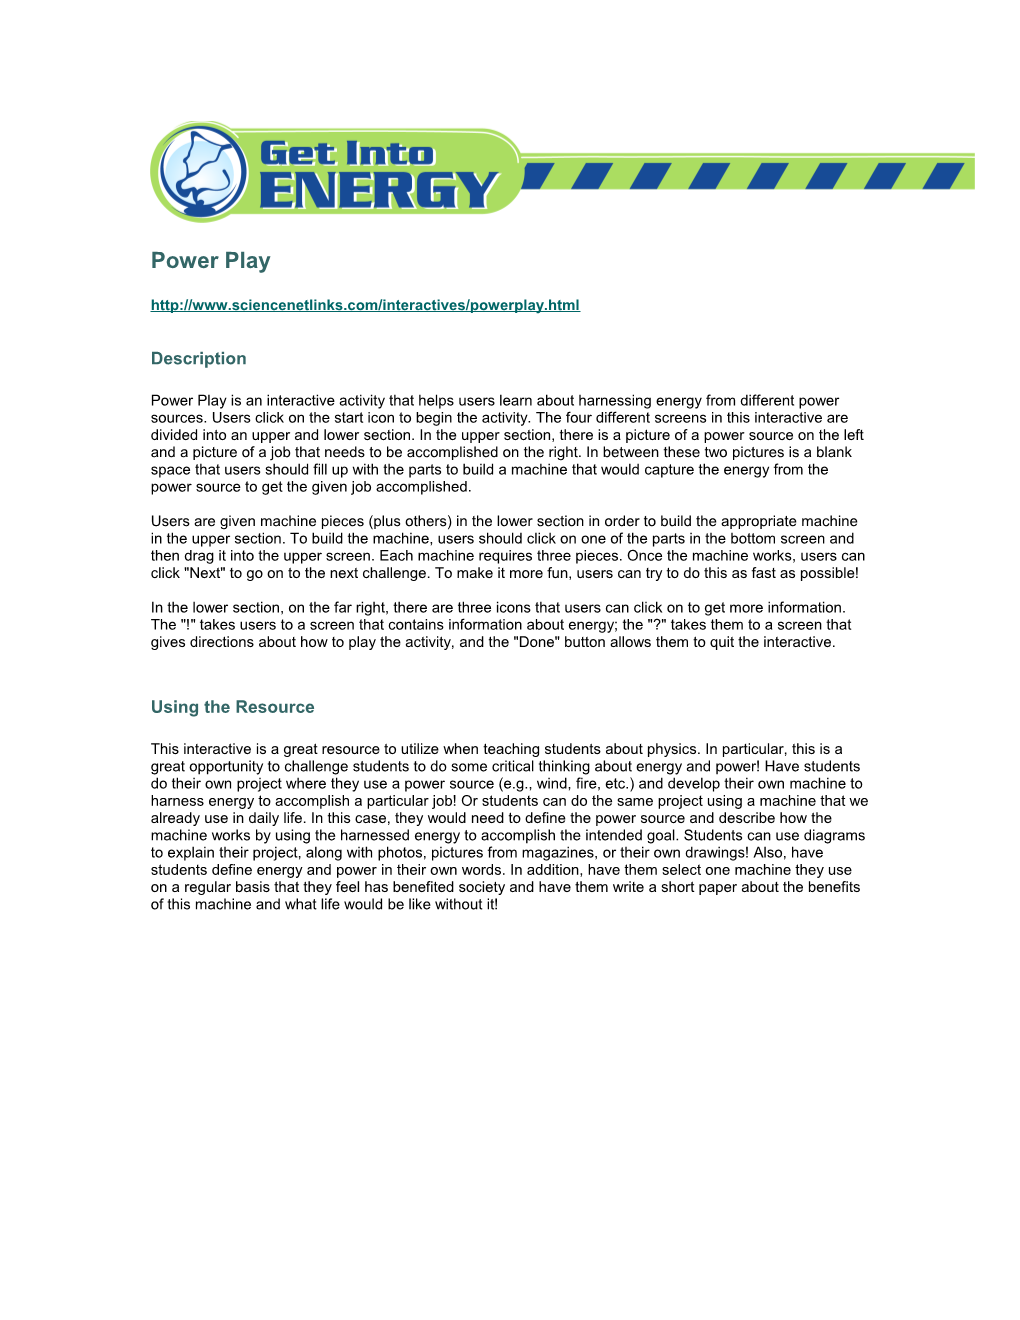 Power Play Is an Interactive Activity That Helps Users Learn About Harnessing Energy From